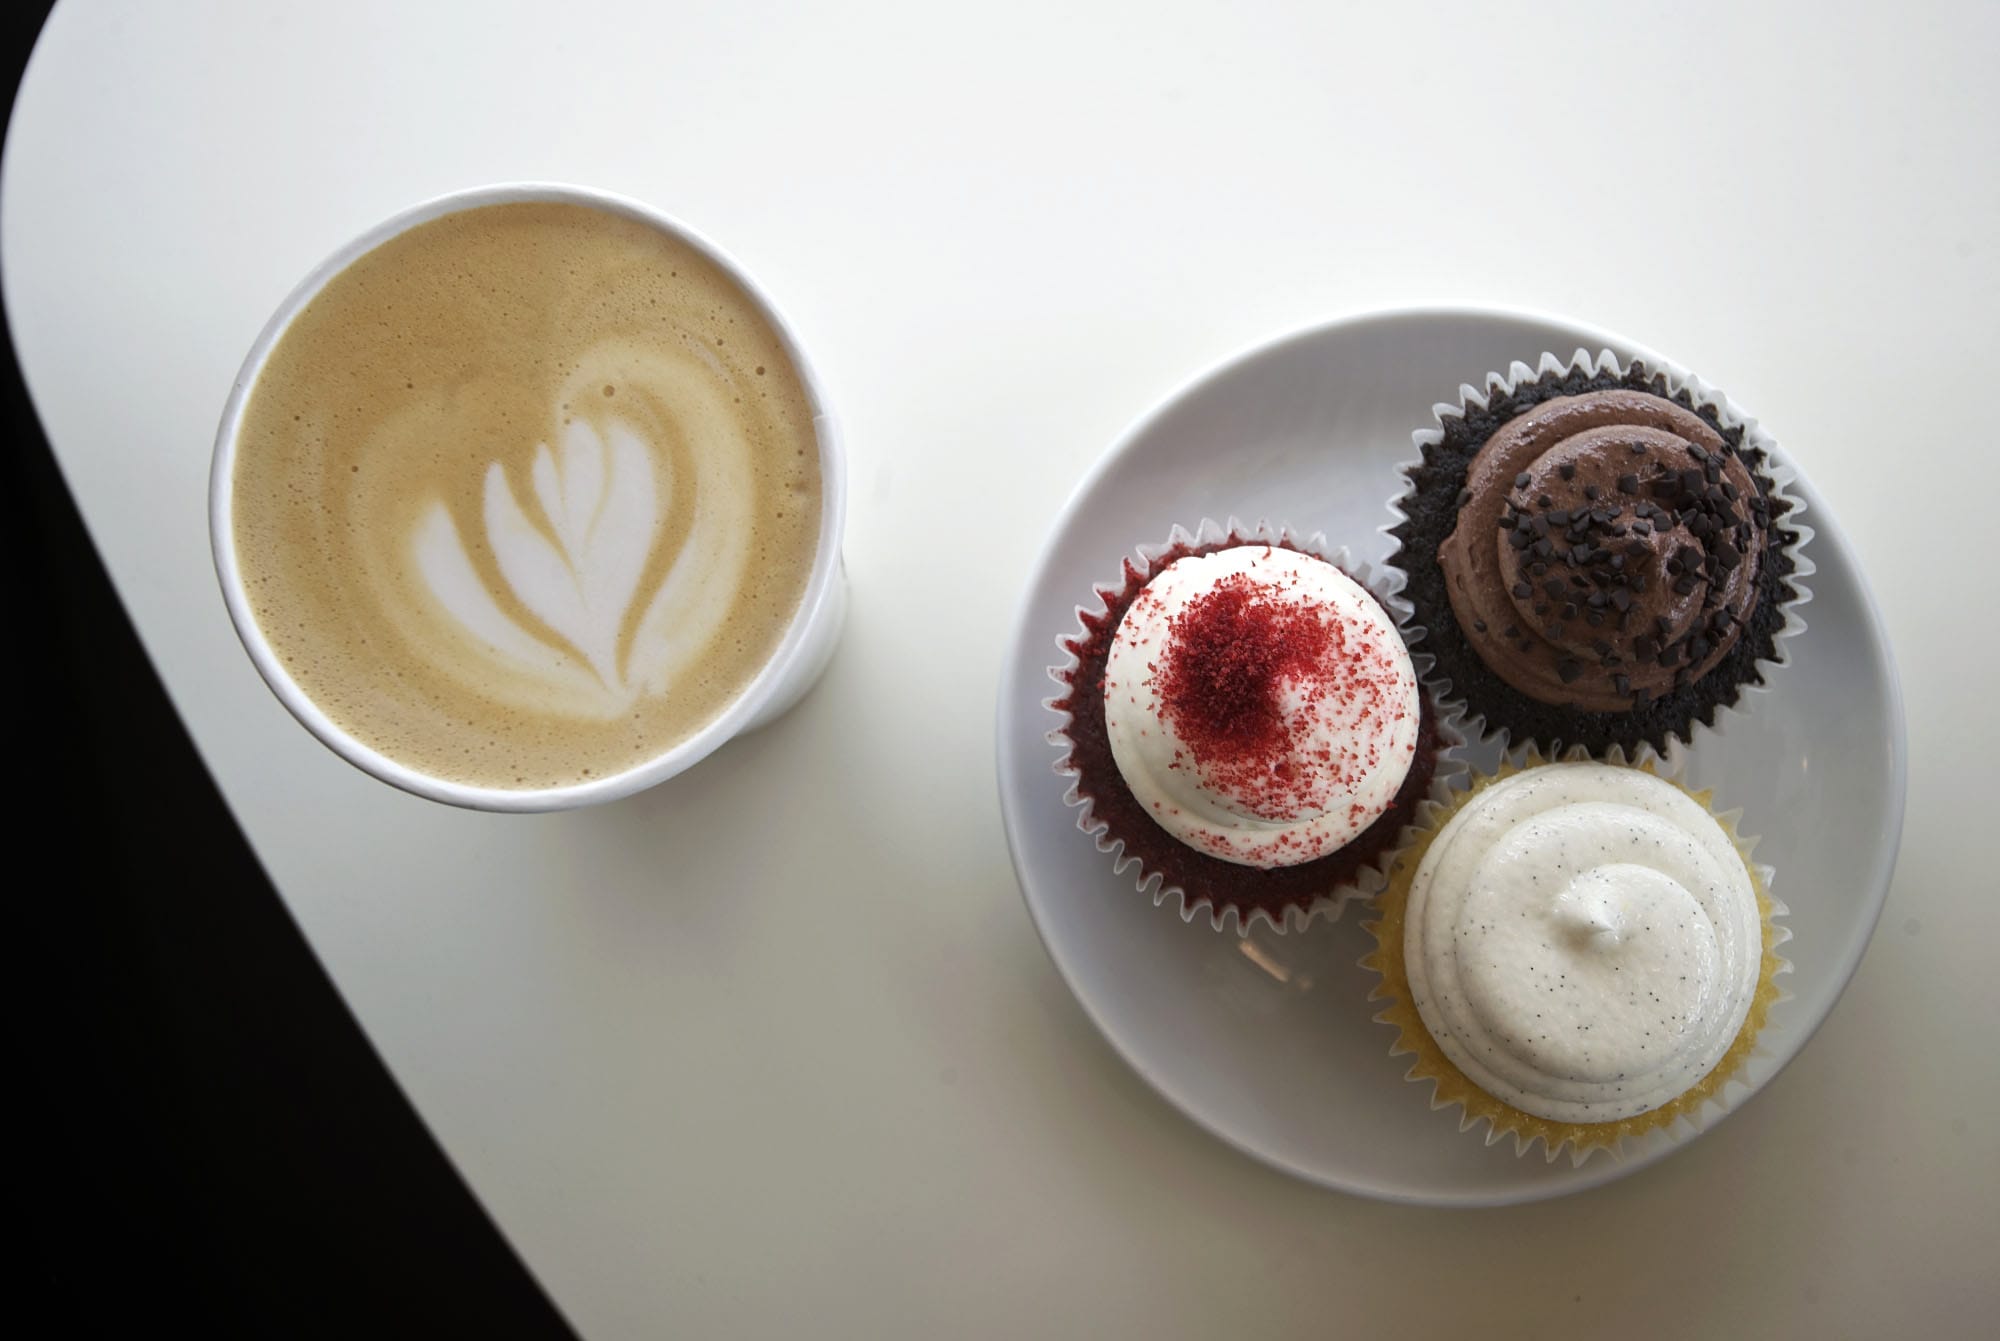 A double-shot latte and assorted cupcakes are among the offerings at Cupidone Coffee House in Vancouver.